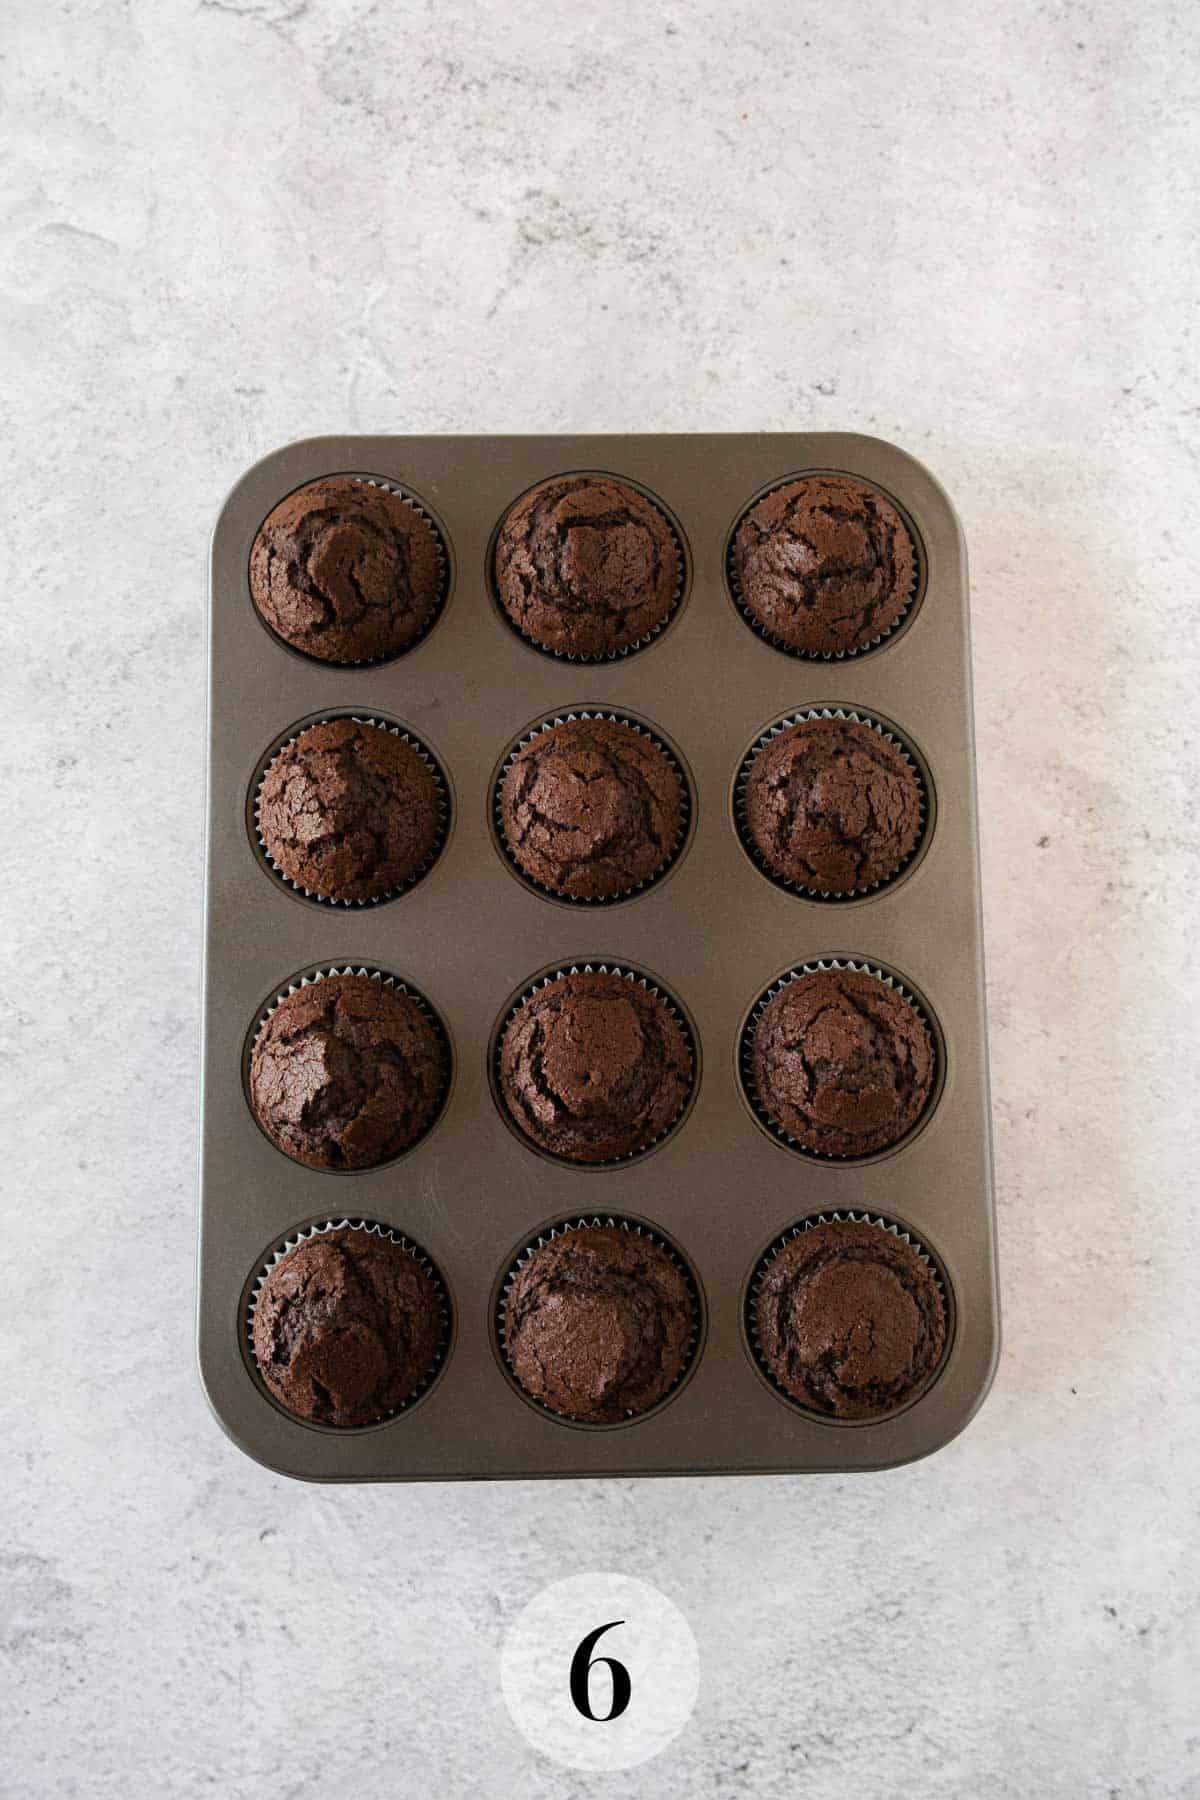 A dozen freshly baked chocolate cupcakes in a brown muffin tray, arranged in four rows on a light grey surface.